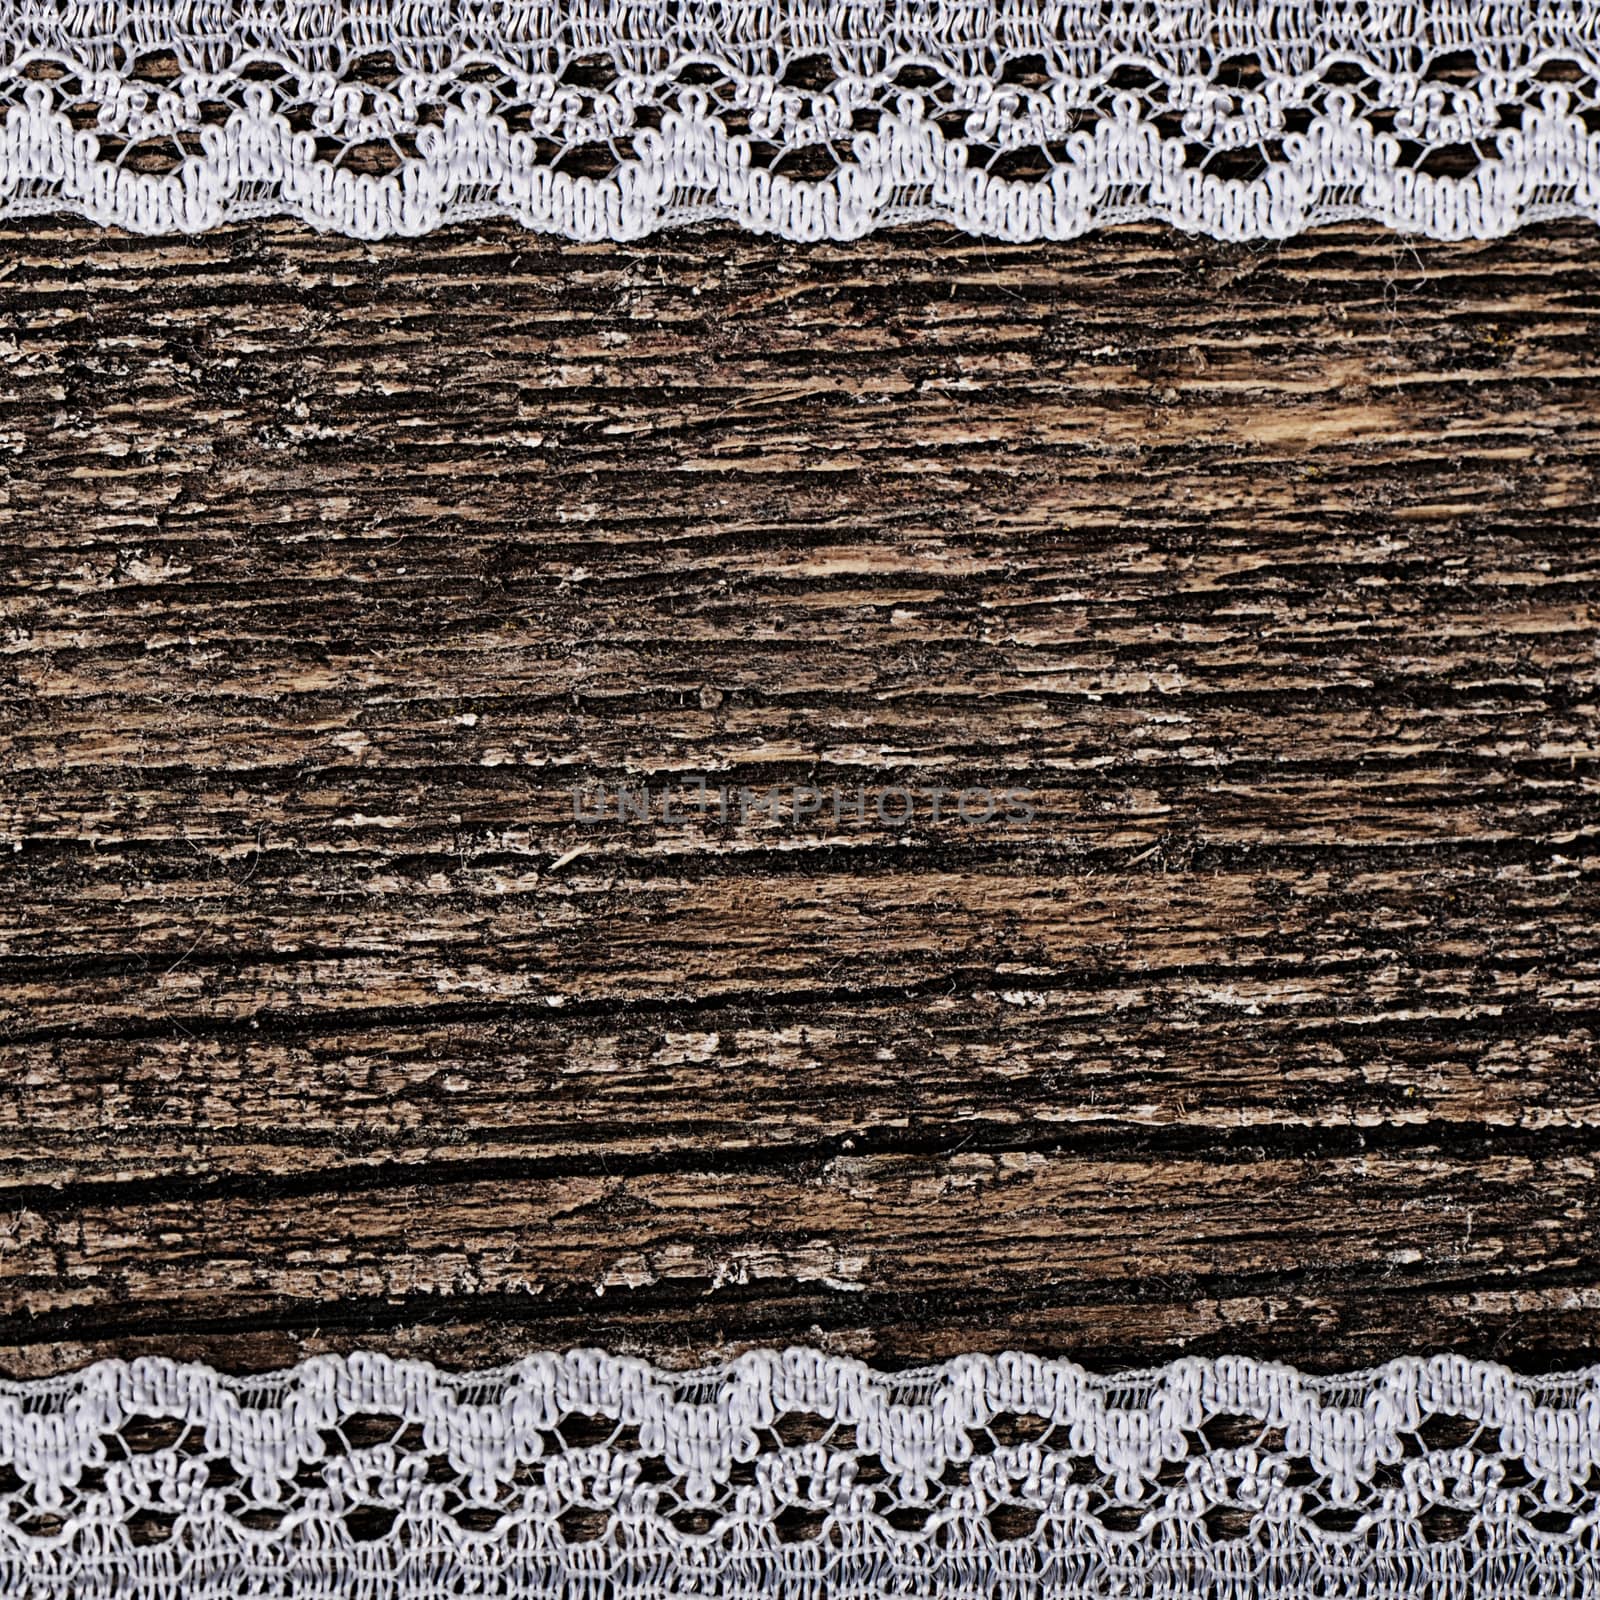 The openwork lace on a wooden background